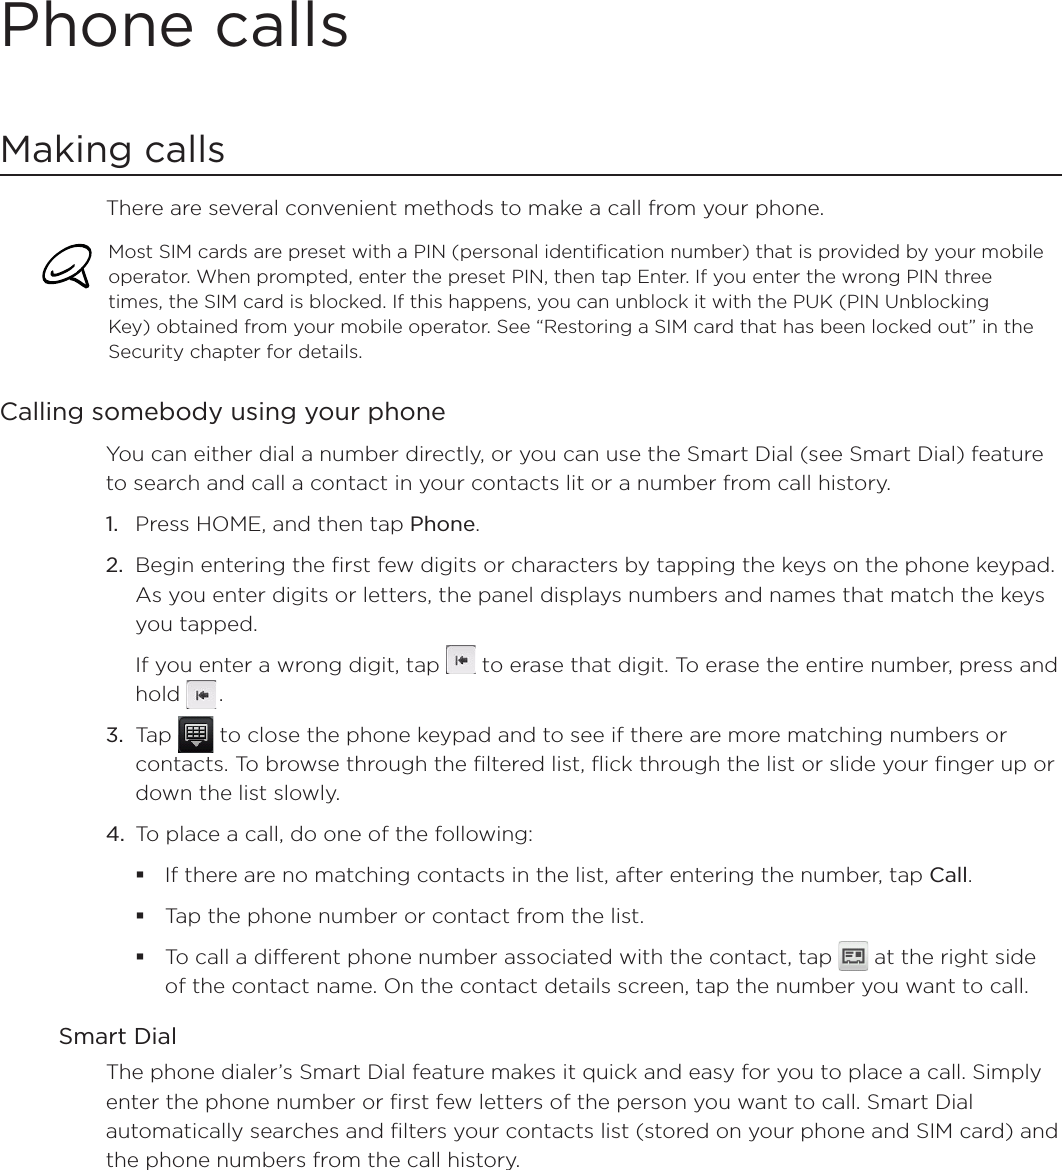 Phone callsMaking callsThere are several convenient methods to make a call from your phone.Most SIM cards are preset with a PIN (personal identification number) that is provided by your mobile operator. When prompted, enter the preset PIN, then tap Enter. If you enter the wrong PIN three times, the SIM card is blocked. If this happens, you can unblock it with the PUK (PIN Unblocking Key) obtained from your mobile operator. See “Restoring a SIM card that has been locked out” in the Security chapter for details. Calling somebody using your phone You can either dial a number directly, or you can use the Smart Dial (see Smart Dial) feature to search and call a contact in your contacts lit or a number from call history.1. Press HOME, and then tap Phone.2. Begin entering the first few digits or characters by tapping the keys on the phone keypad. As you enter digits or letters, the panel displays numbers and names that match the keys you tapped.If you enter a wrong digit, tap  to erase that digit. To erase the entire number, press and hold .3. Tap   to close the phone keypad and to see if there are more matching numbers or contacts. To browse through the filtered list, flick through the list or slide your finger up or down the list slowly.4. To place a call, do one of the following:If there are no matching contacts in the list, after entering the number, tap Call.Tap the phone number or contact from the list.To call a different phone number associated with the contact, tap   at the right side of the contact name. On the contact details screen, tap the number you want to call.Smart DialThe phone dialer’s Smart Dial feature makes it quick and easy for you to place a call. Simply enter the phone number or first few letters of the person you want to call. Smart Dial automatically searches and filters your contacts list (stored on your phone and SIM card) and the phone numbers from the call history.